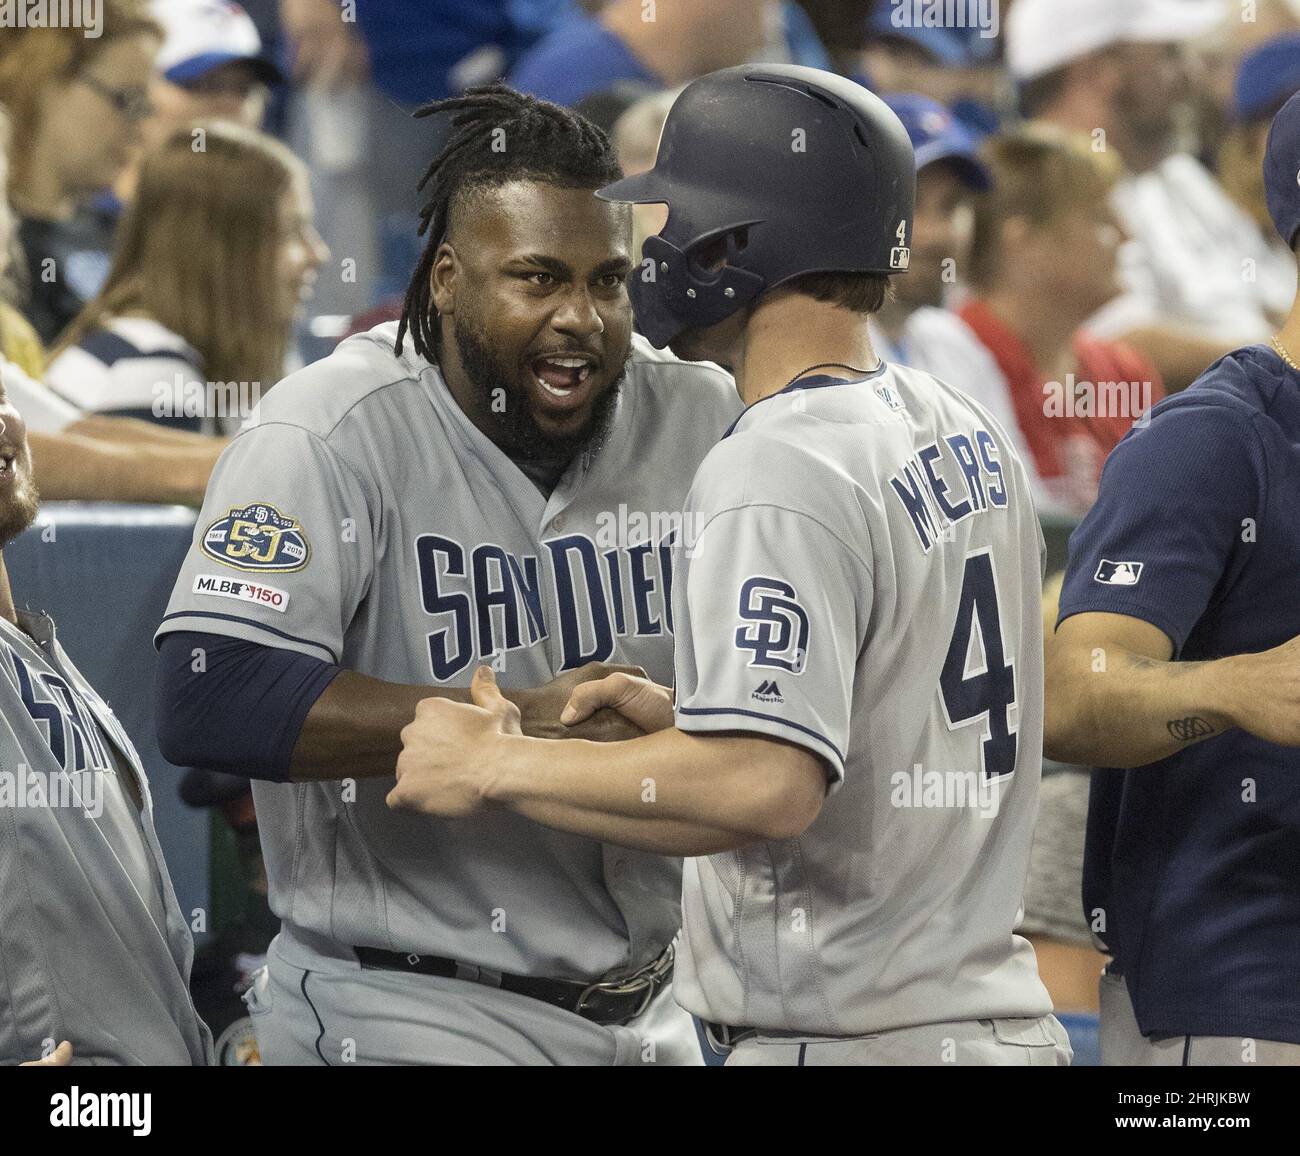 San Diego Padres Will Myers greeted by team mate Franmil Reyes